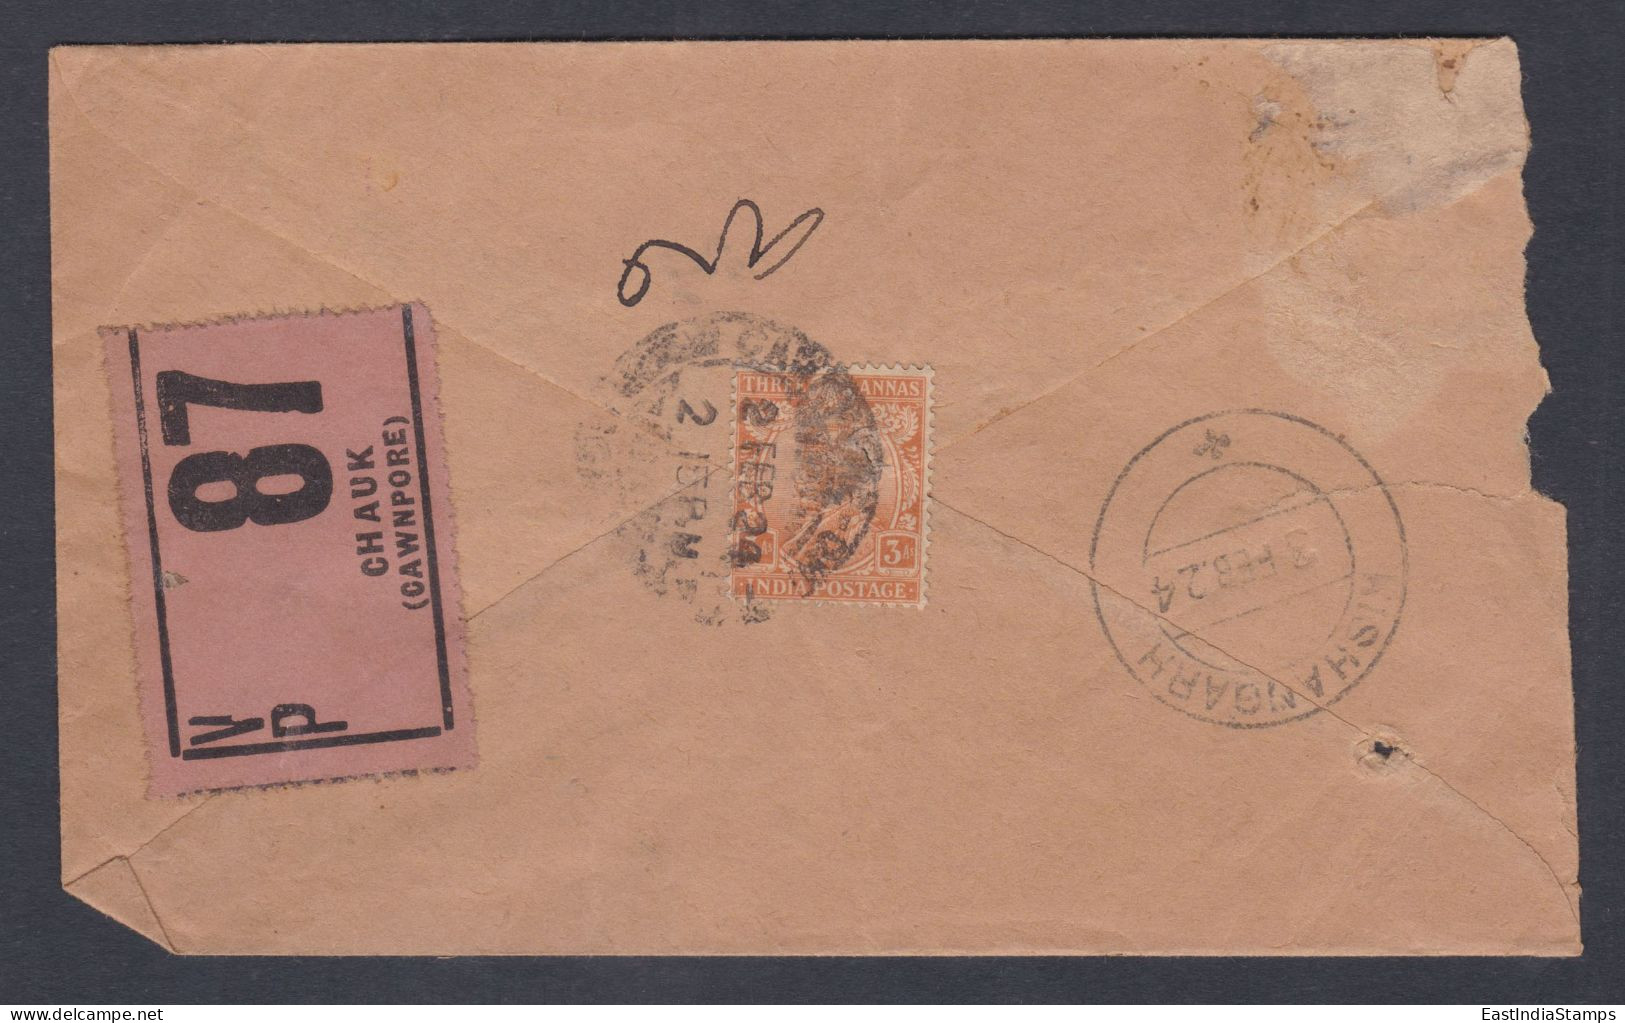 Inde British India 1924 Used Registered Cover VP Label, Value Payable, Kanpur To Kishangarh State, King George V - 1911-35 Roi Georges V